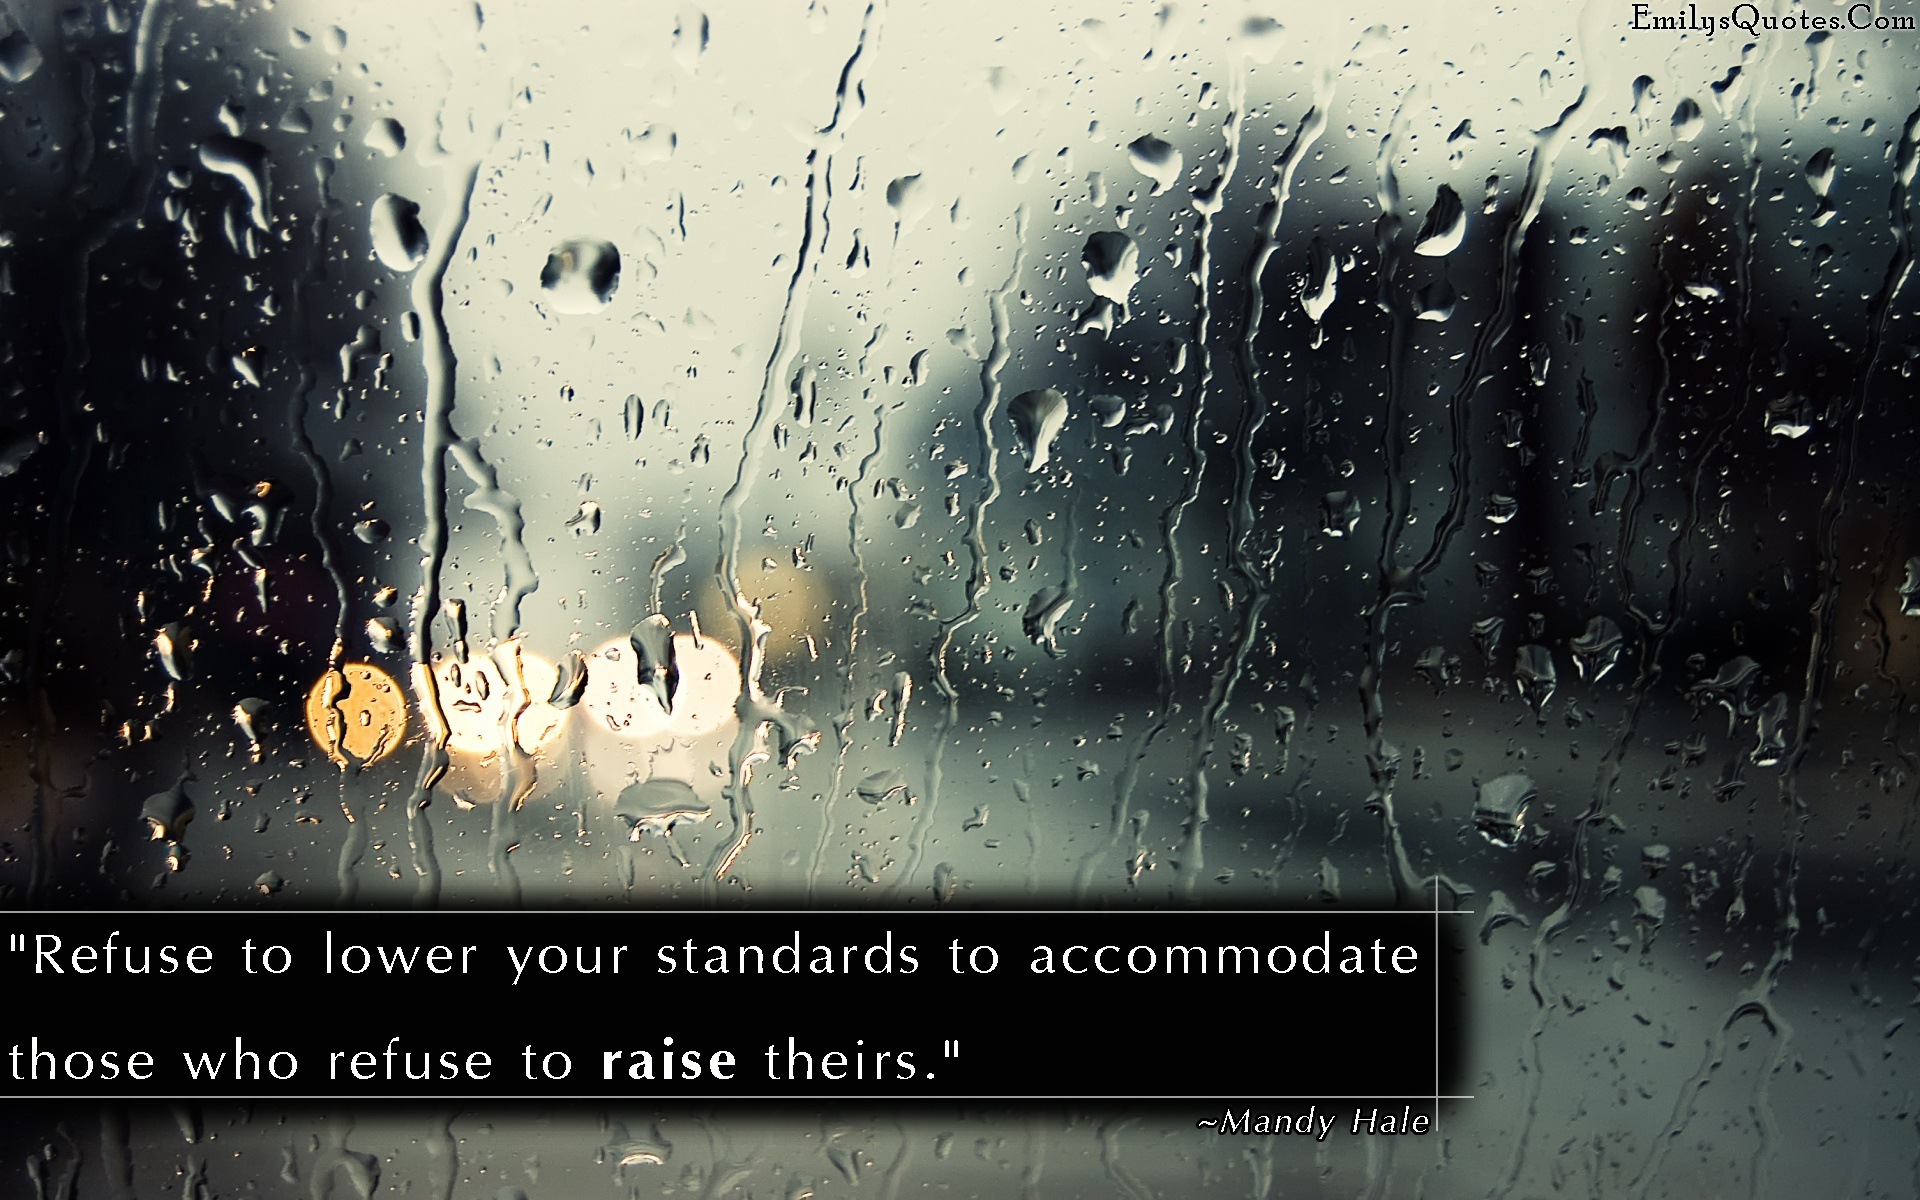 Refuse to lower your standards to accommodate those who refuse to raise theirs